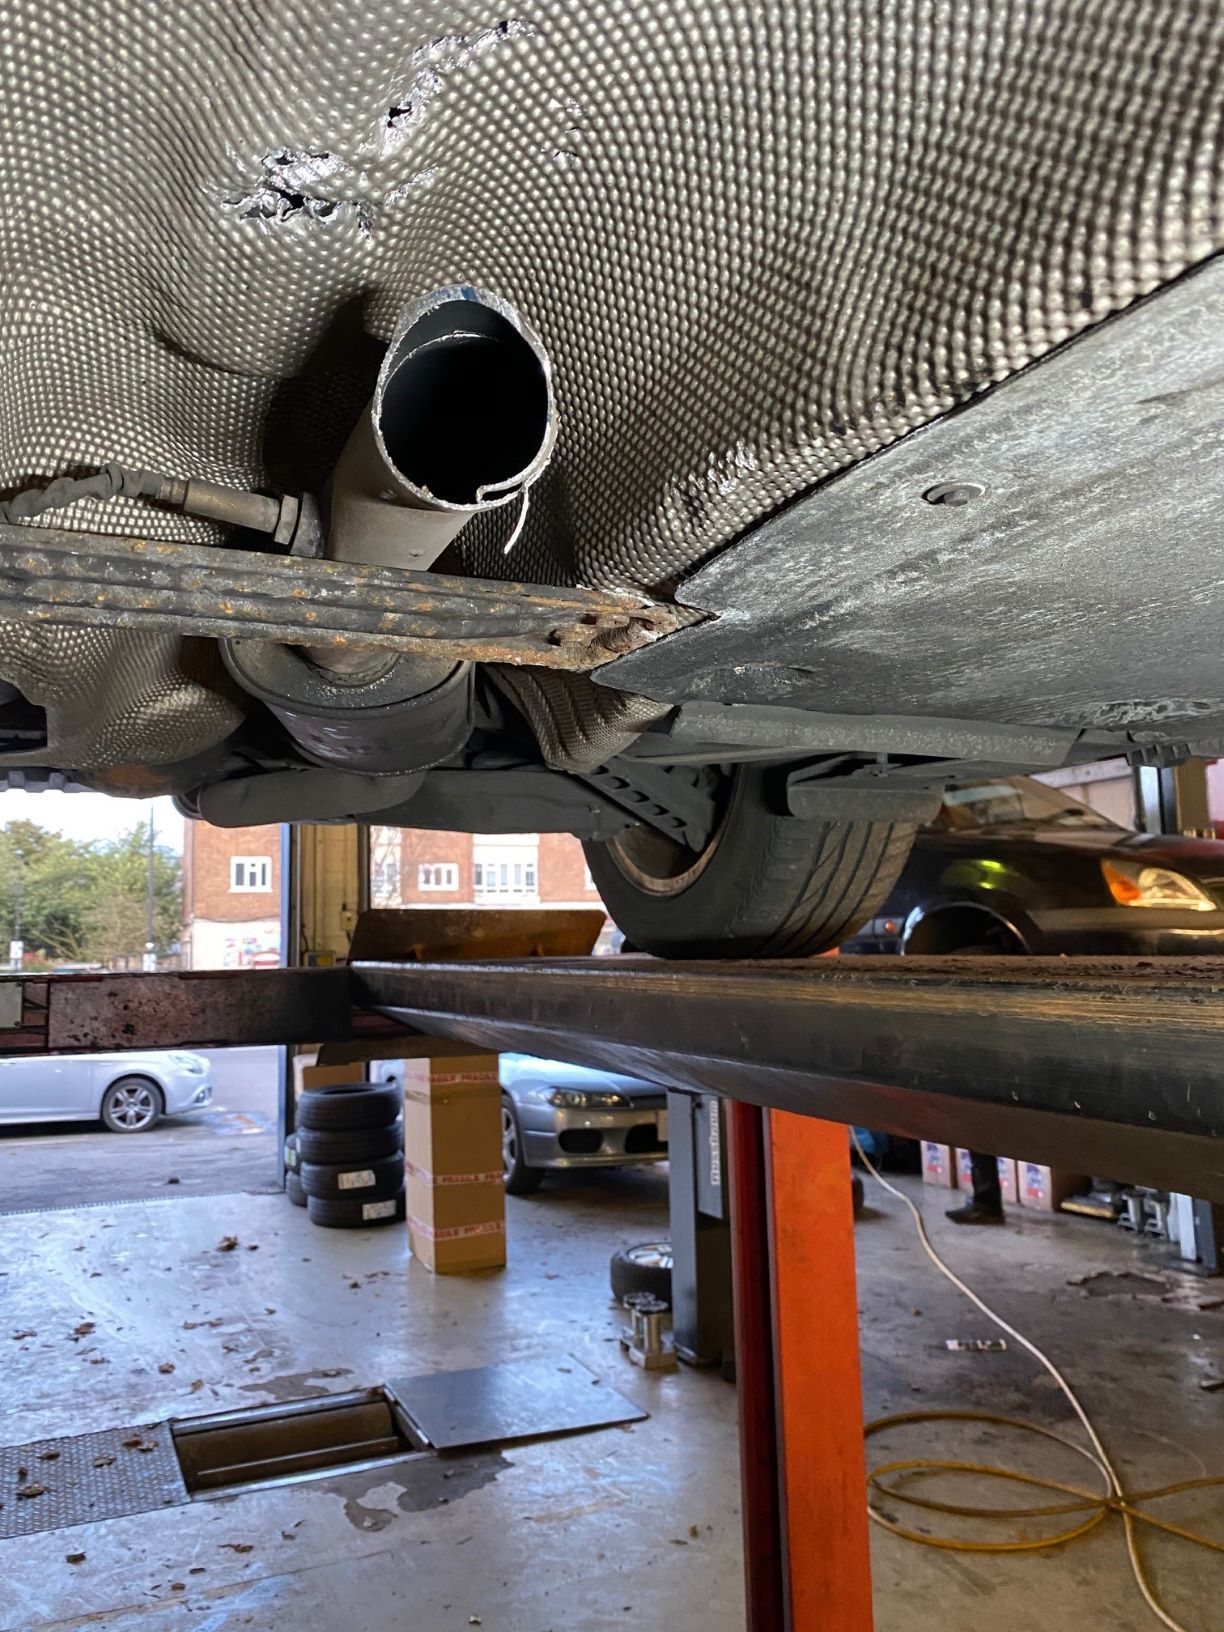 Catalytic converter theft has exploded in recent years